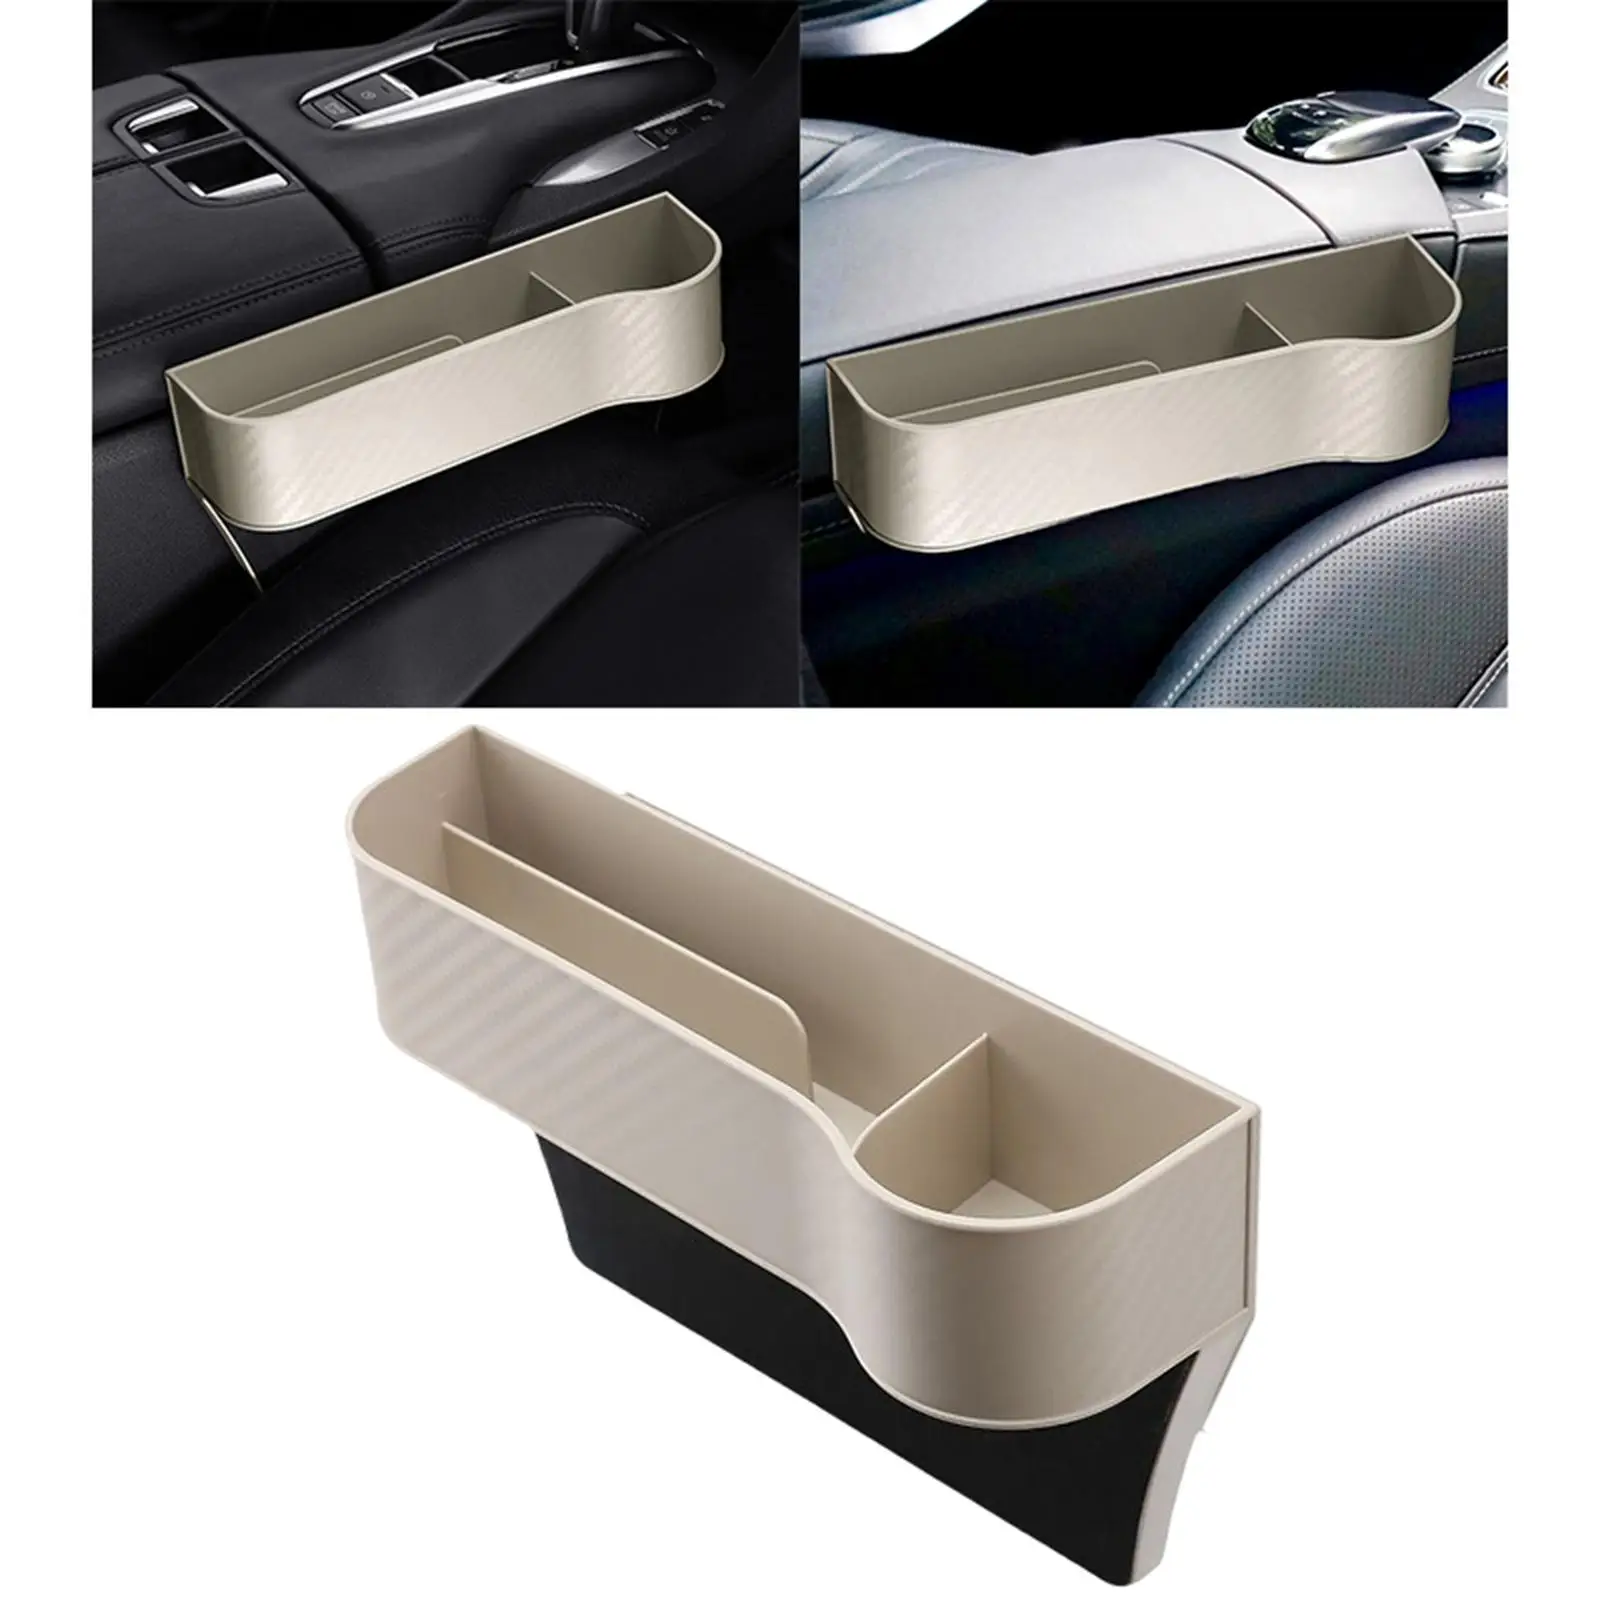 Car Seat Gap Filler Organizer Professional Insert Between The Seat and Console High Performance Multifunctional Accessories